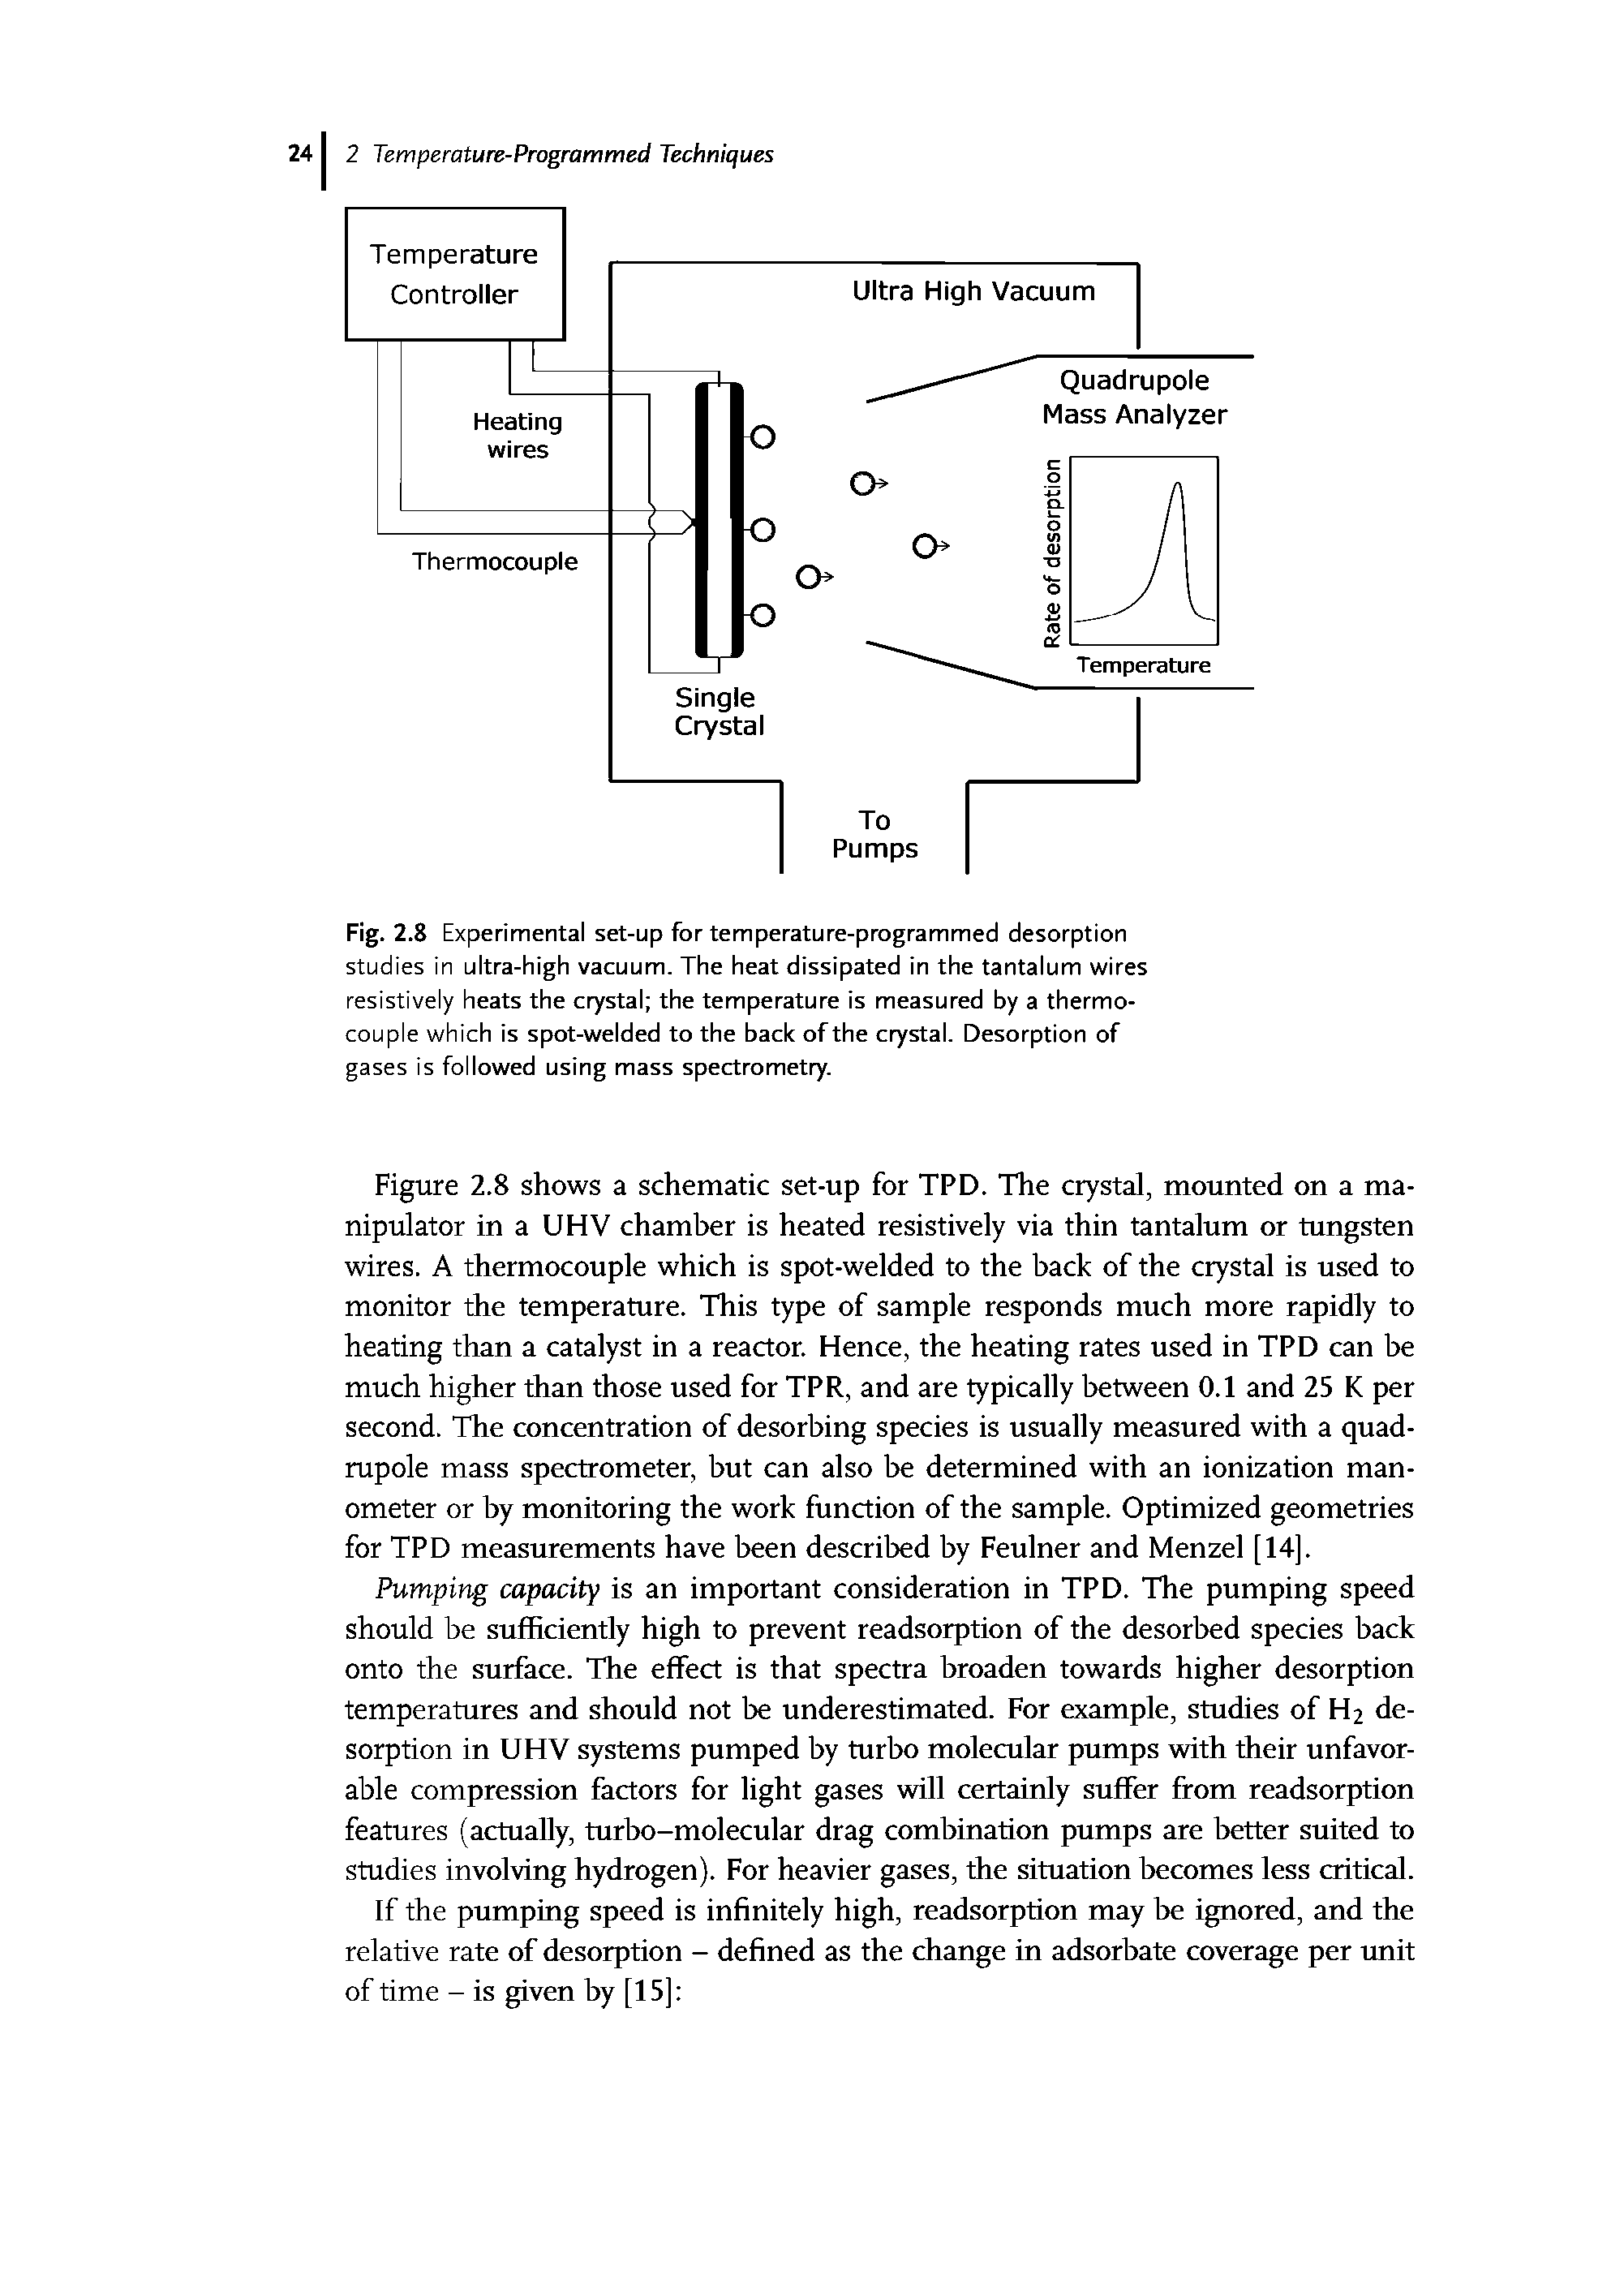 Fig. 2.8 Experimental set-up for temperature-programmed desorption studies in ultra-high vacuum. The heat dissipated in the tantalum wires resistively heats the crystal the temperature is measured by a thermocouple which is spot-welded to the back of the crystal. Desorption of gases is followed using mass spectrometry.